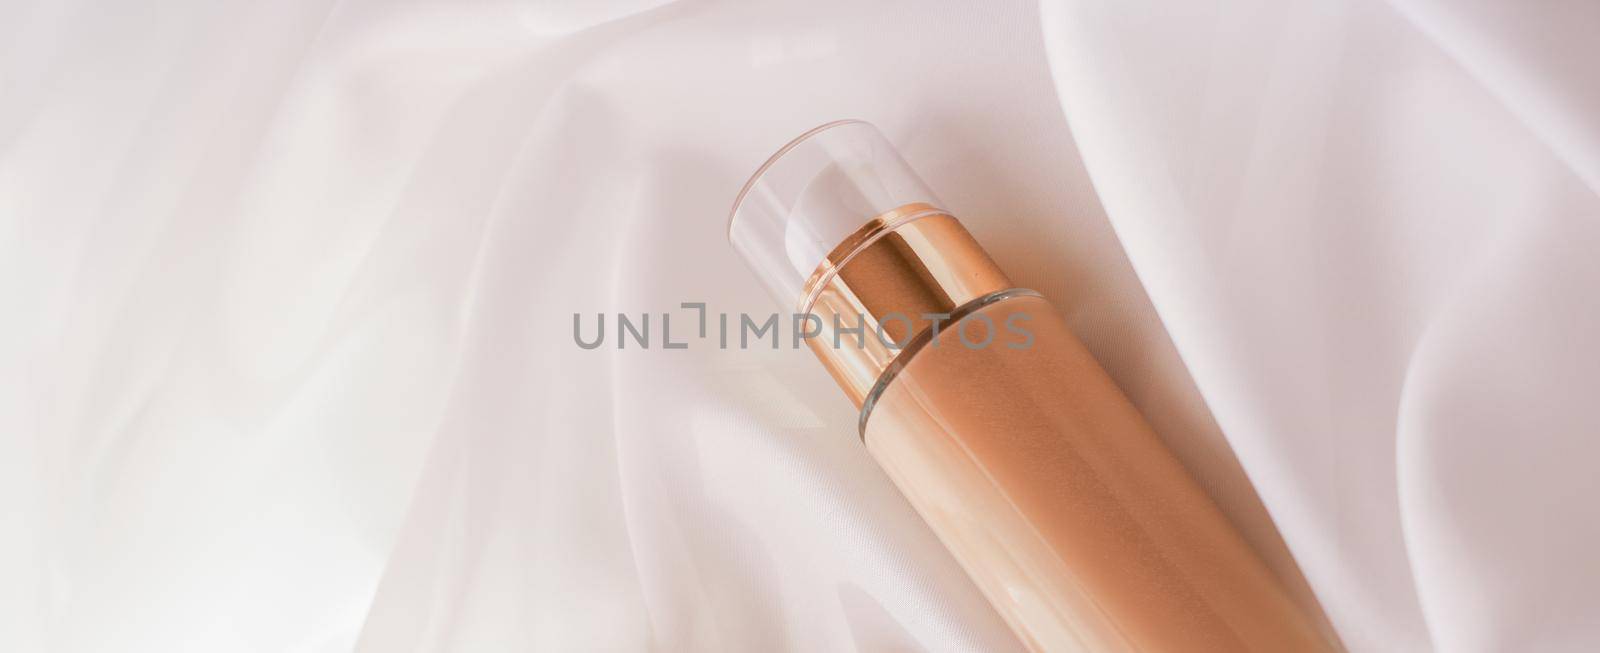 Tonal bb cream bottle make-up fluid foundation base for nude skin color on silk background, cosmetics product as luxury beauty brand holiday design by Anneleven